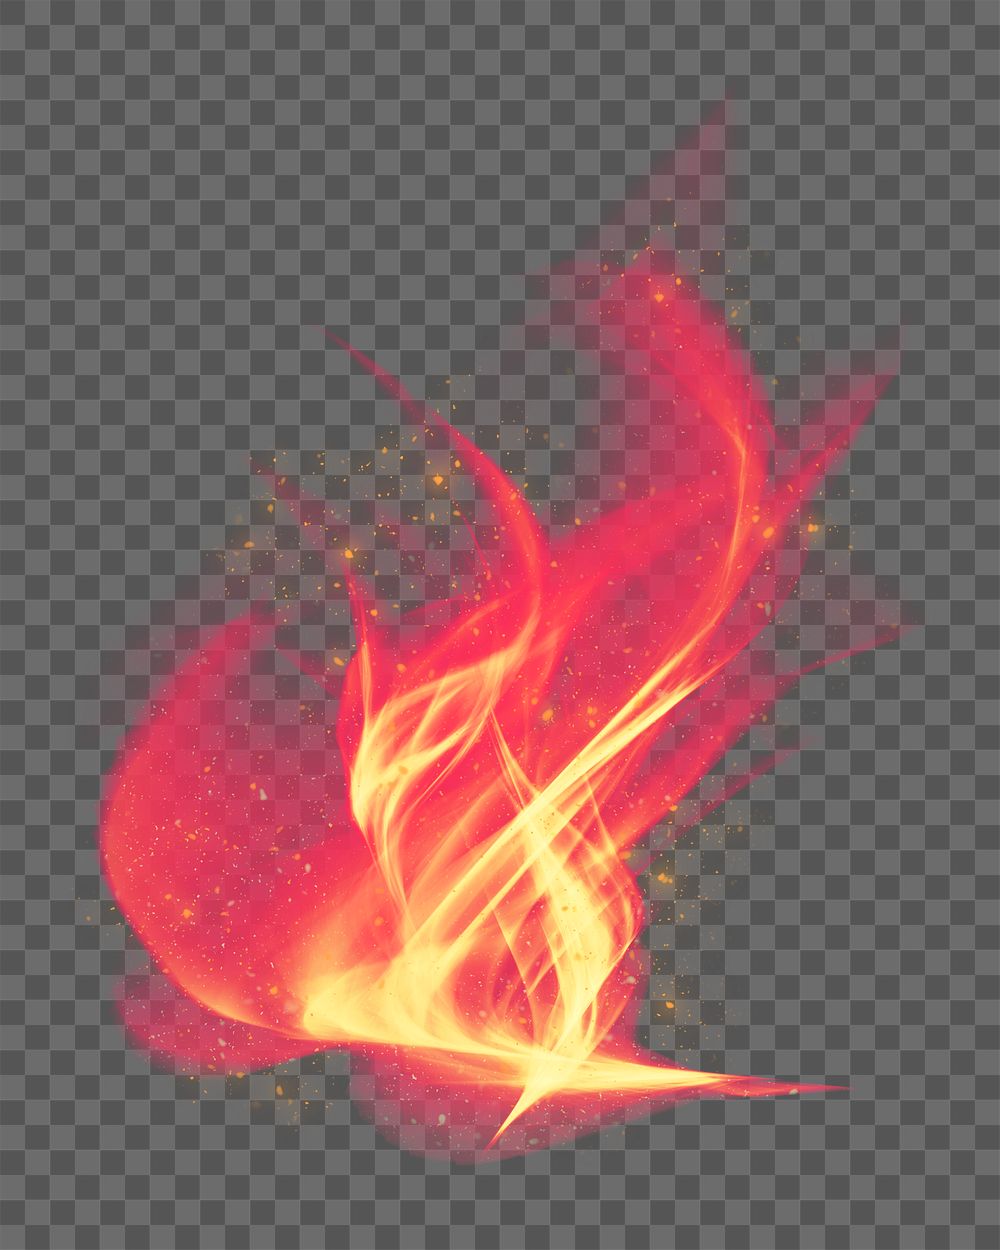 Png retro red fire flame graphic element